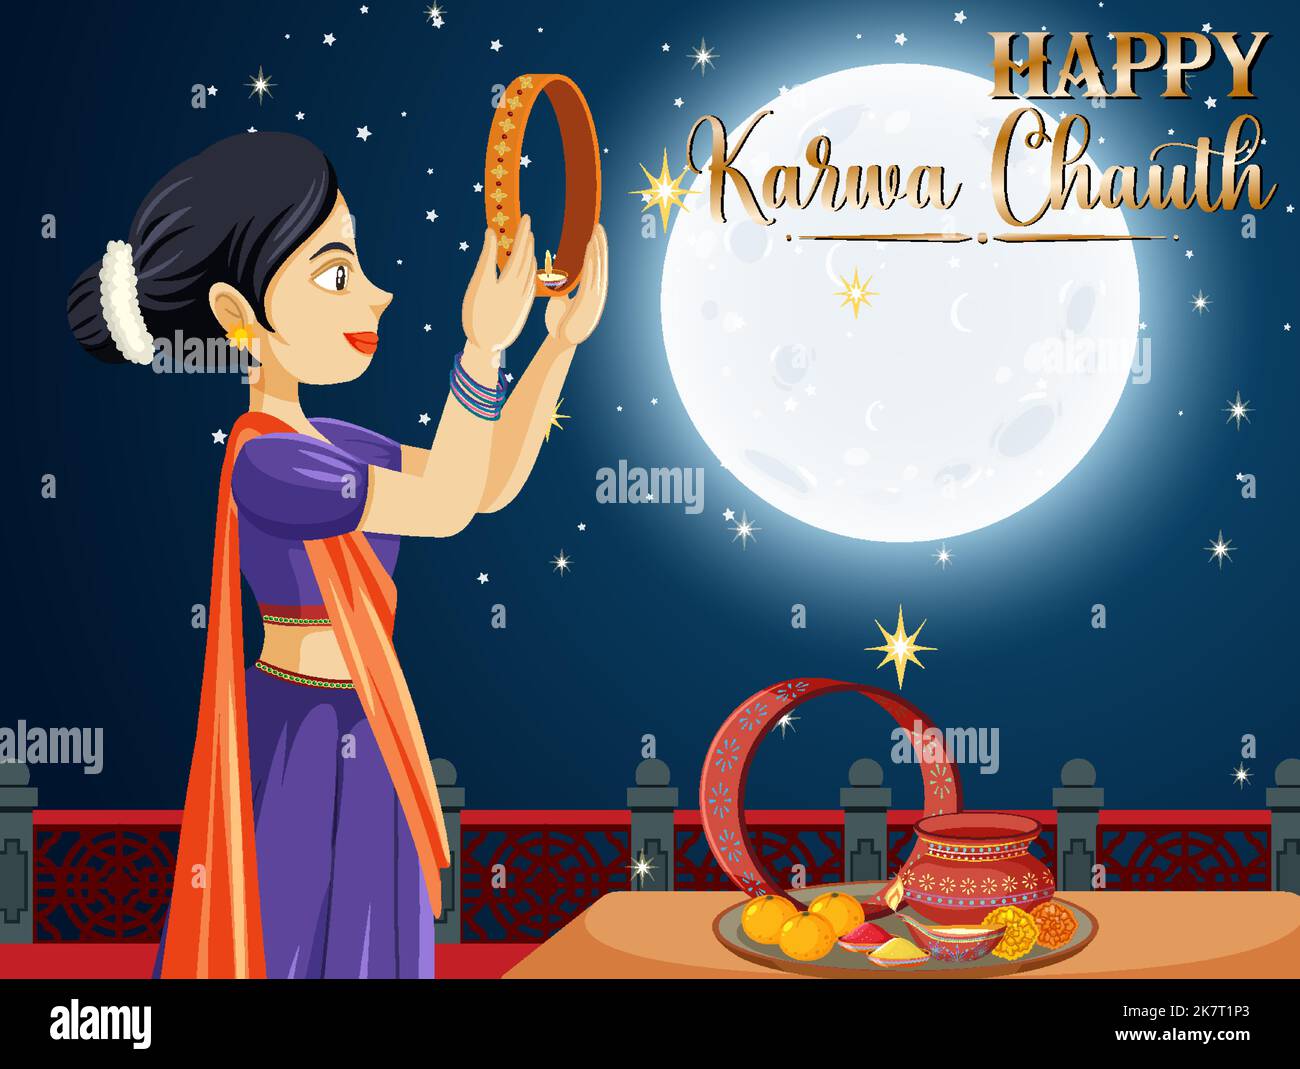 Happy karva chauth Stock Vector Images - Alamy